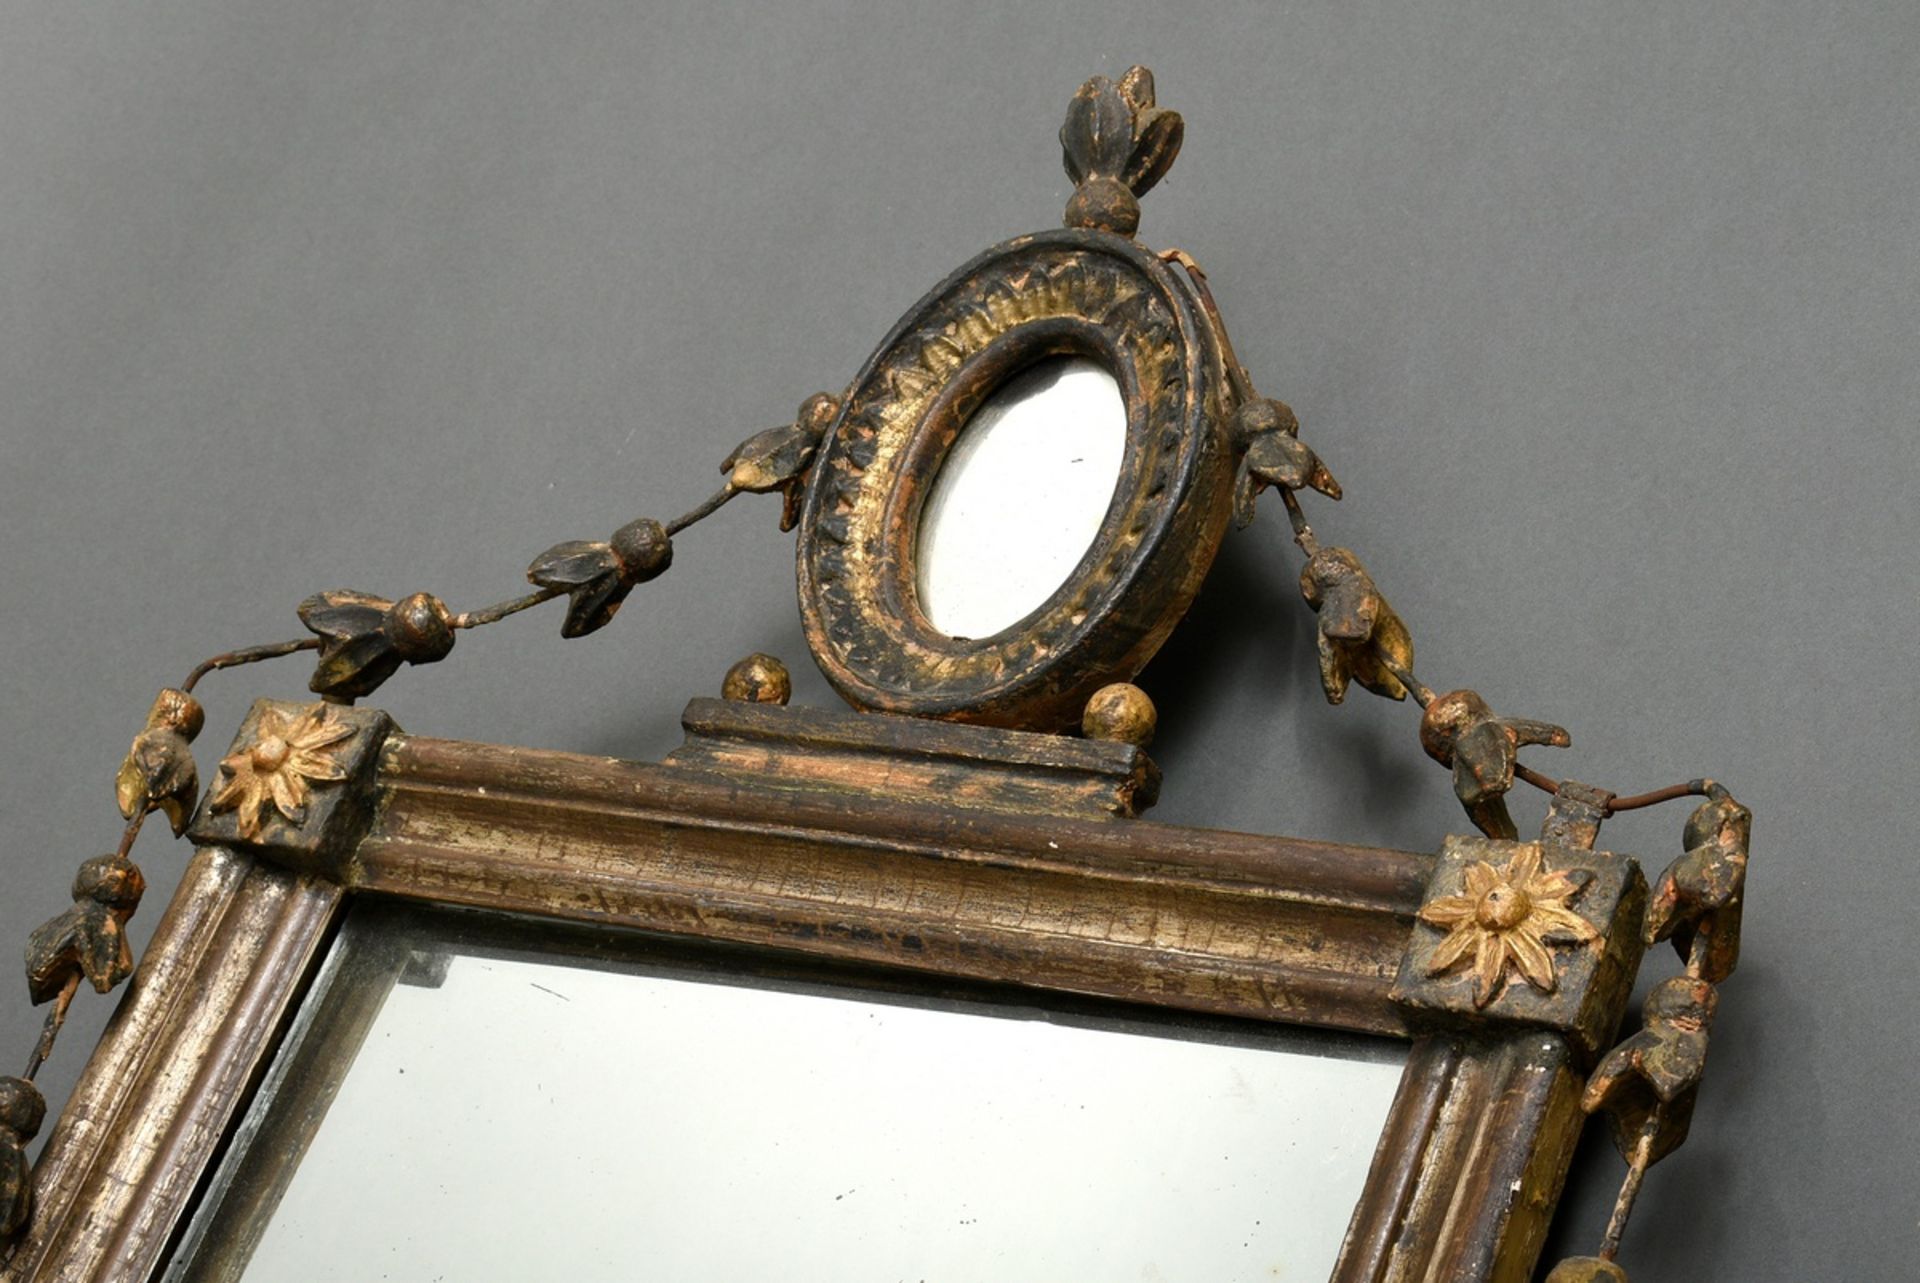 Gilded classicistic console mirror with filigree floral festoons and rosette frame as crowning, old - Image 2 of 5